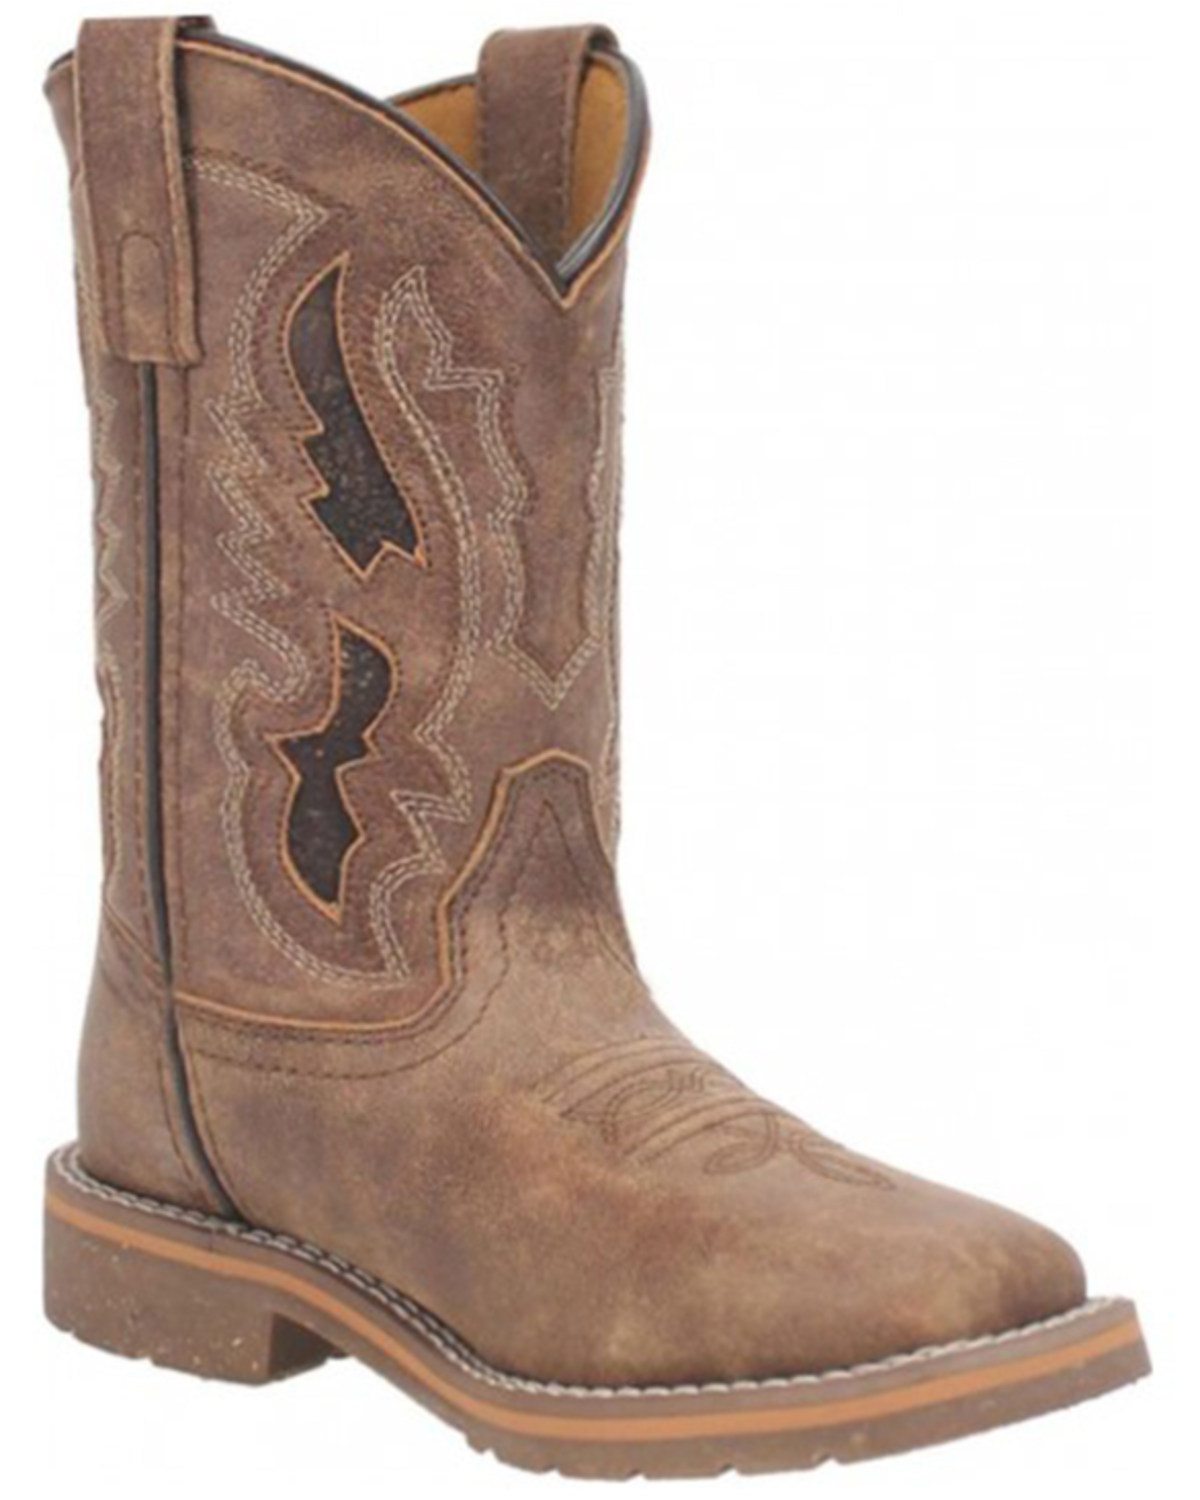 Dan Post Boys' Marty Western Boots - Broad Square Toe